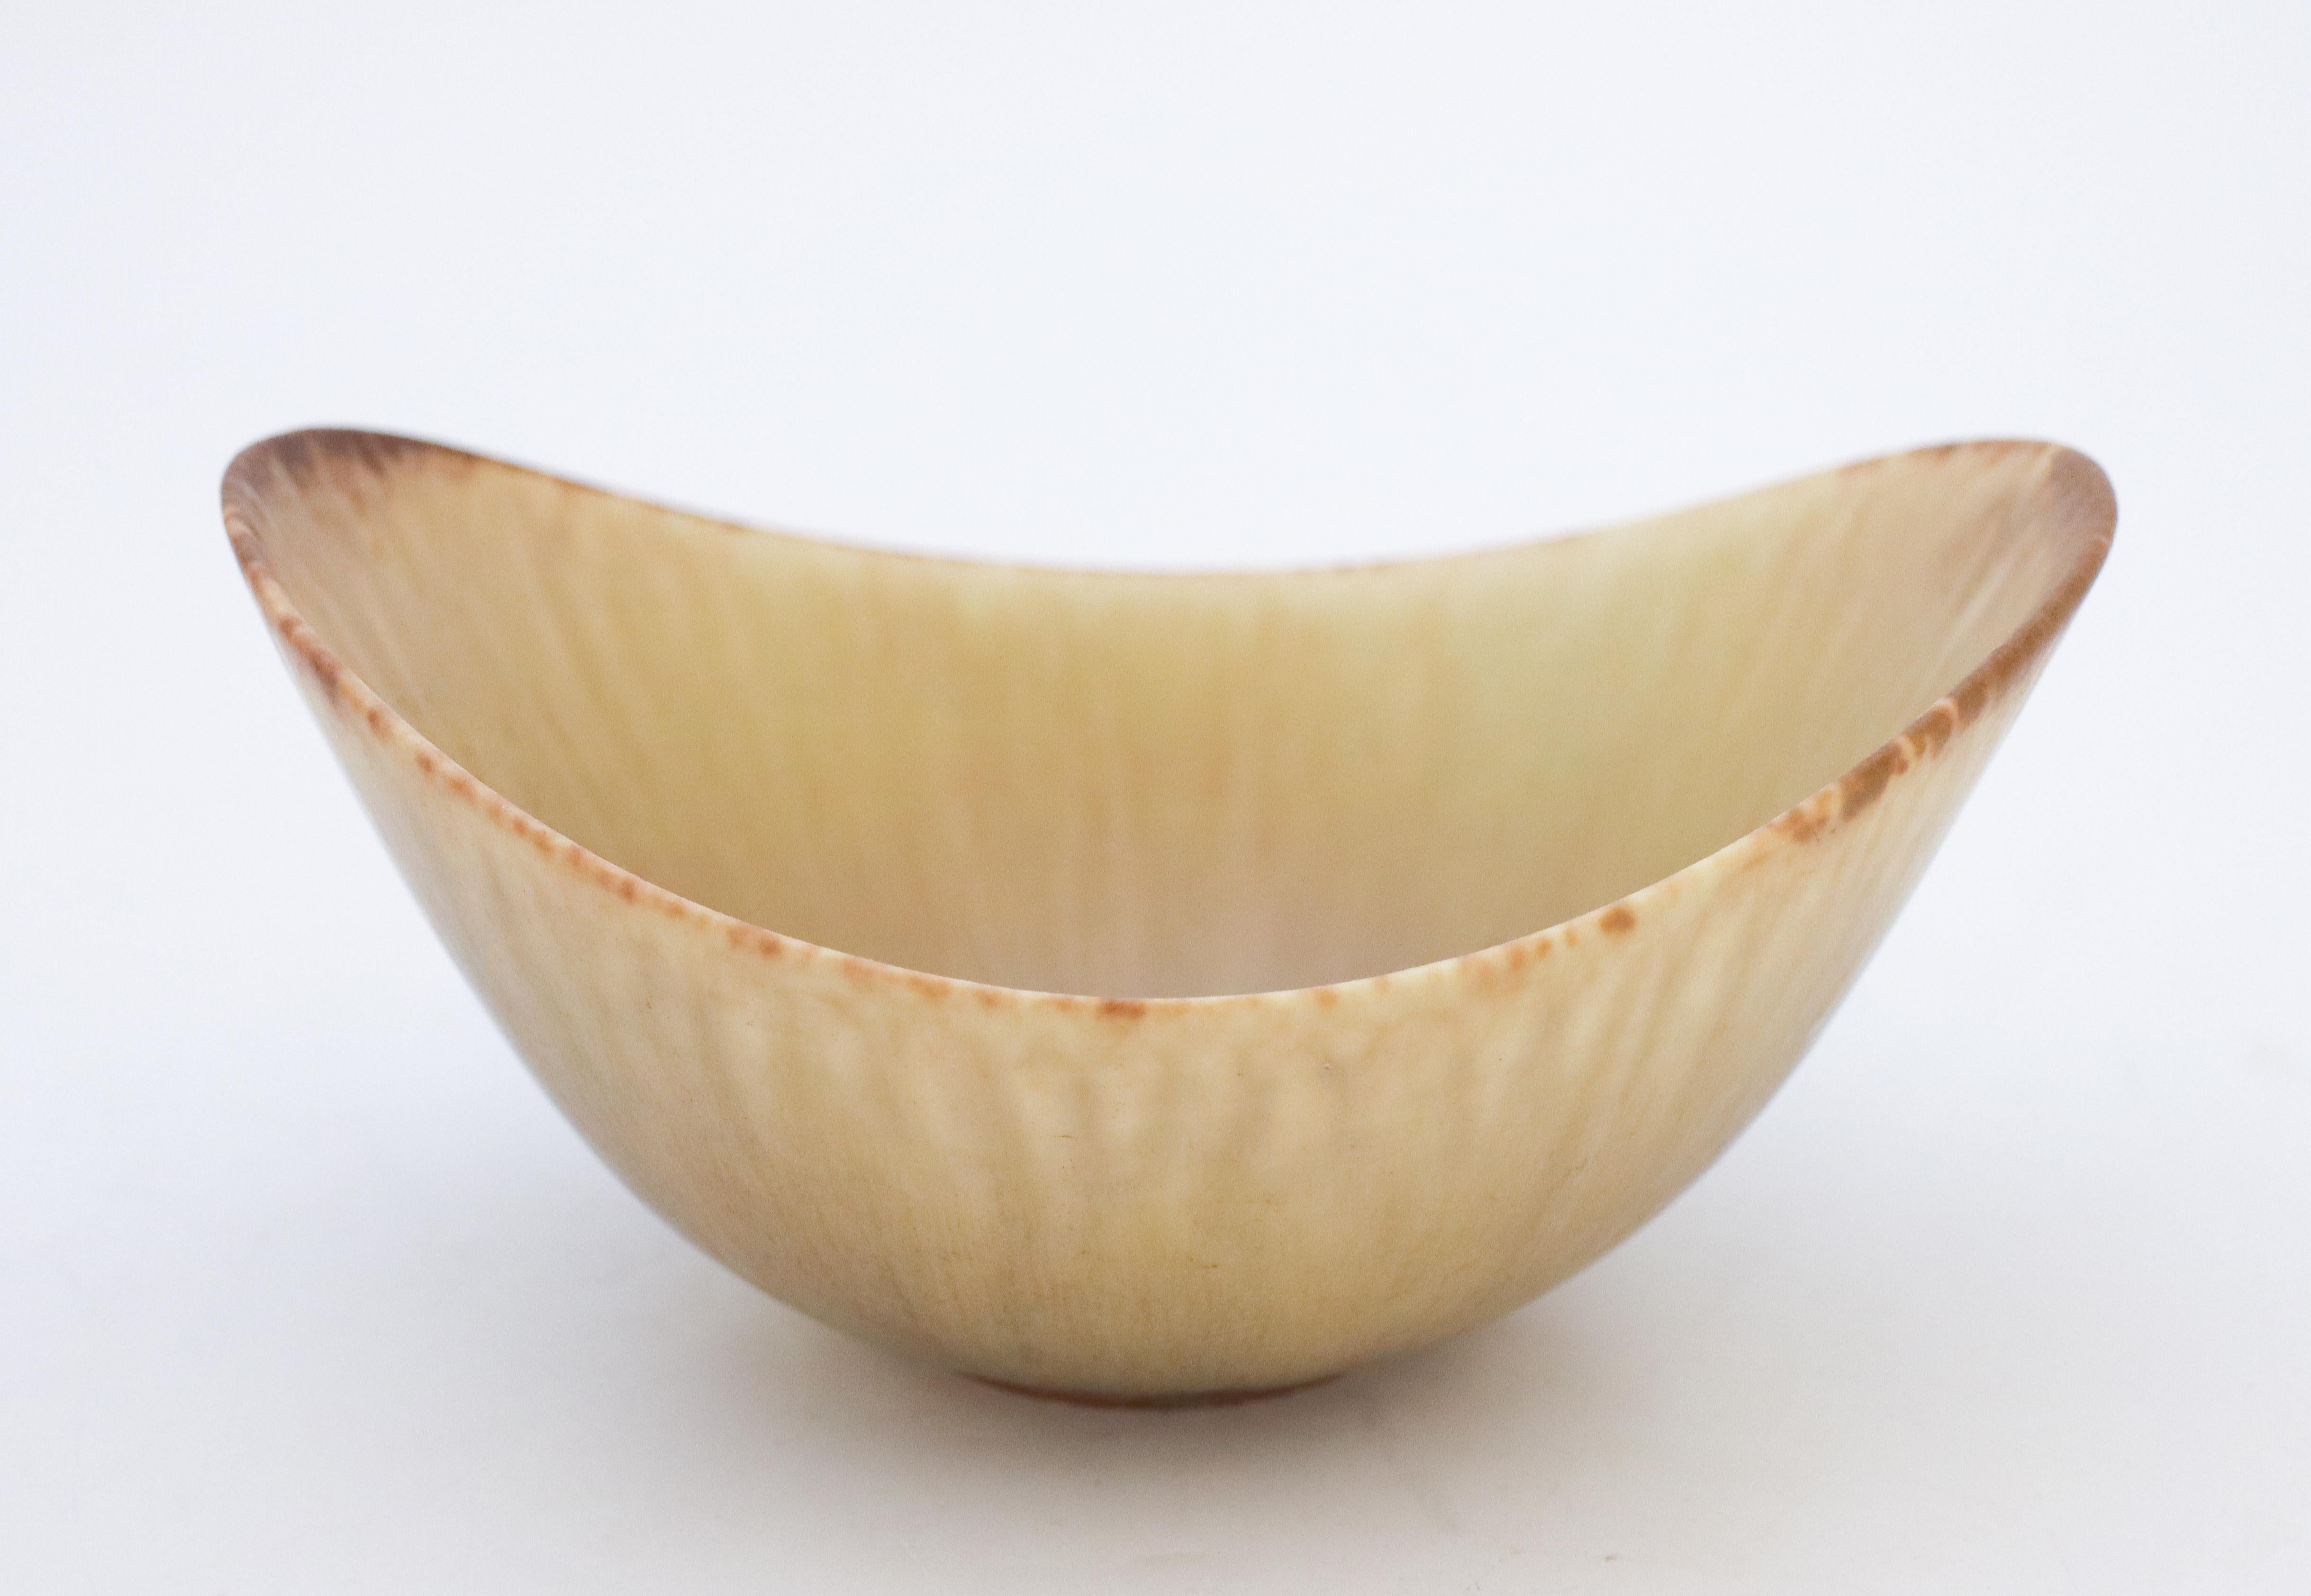 A beige bowl designed by Gunnar Nylund at Rörstrand, the bowl is 8 cm (3.2